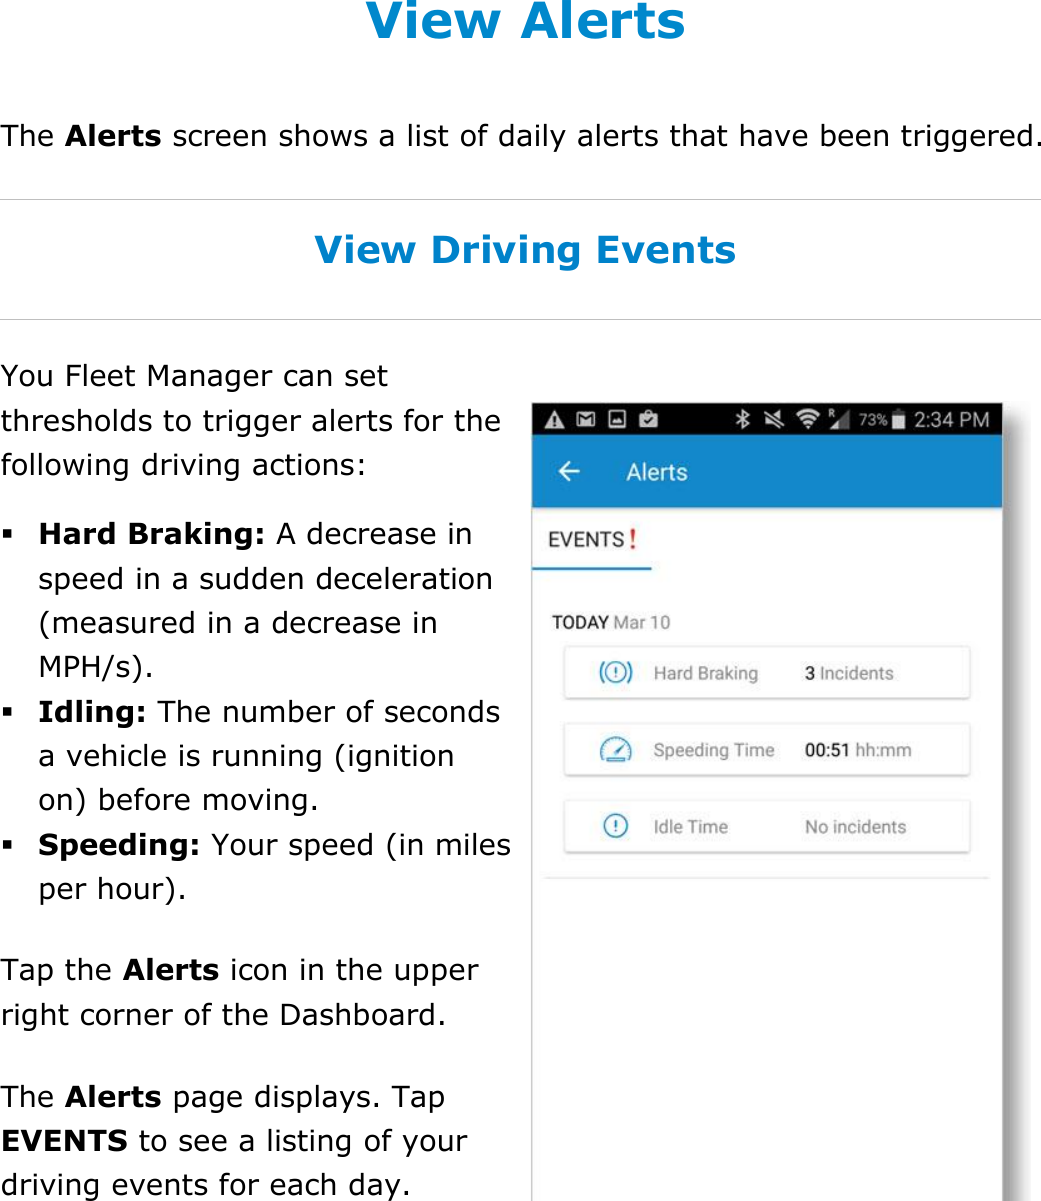 Complete a DVIR DriverConnect User Guide  60 © 2016-2017, Rand McNally, Inc. View Alerts The Alerts screen shows a list of daily alerts that have been triggered.  View Driving Events You Fleet Manager can set thresholds to trigger alerts for the following driving actions:  Hard Braking: A decrease in speed in a sudden deceleration (measured in a decrease in MPH/s).  Idling: The number of seconds a vehicle is running (ignition on) before moving.  Speeding: Your speed (in miles per hour). Tap the Alerts icon in the upper right corner of the Dashboard. The Alerts page displays. Tap EVENTS to see a listing of your driving events for each day.   